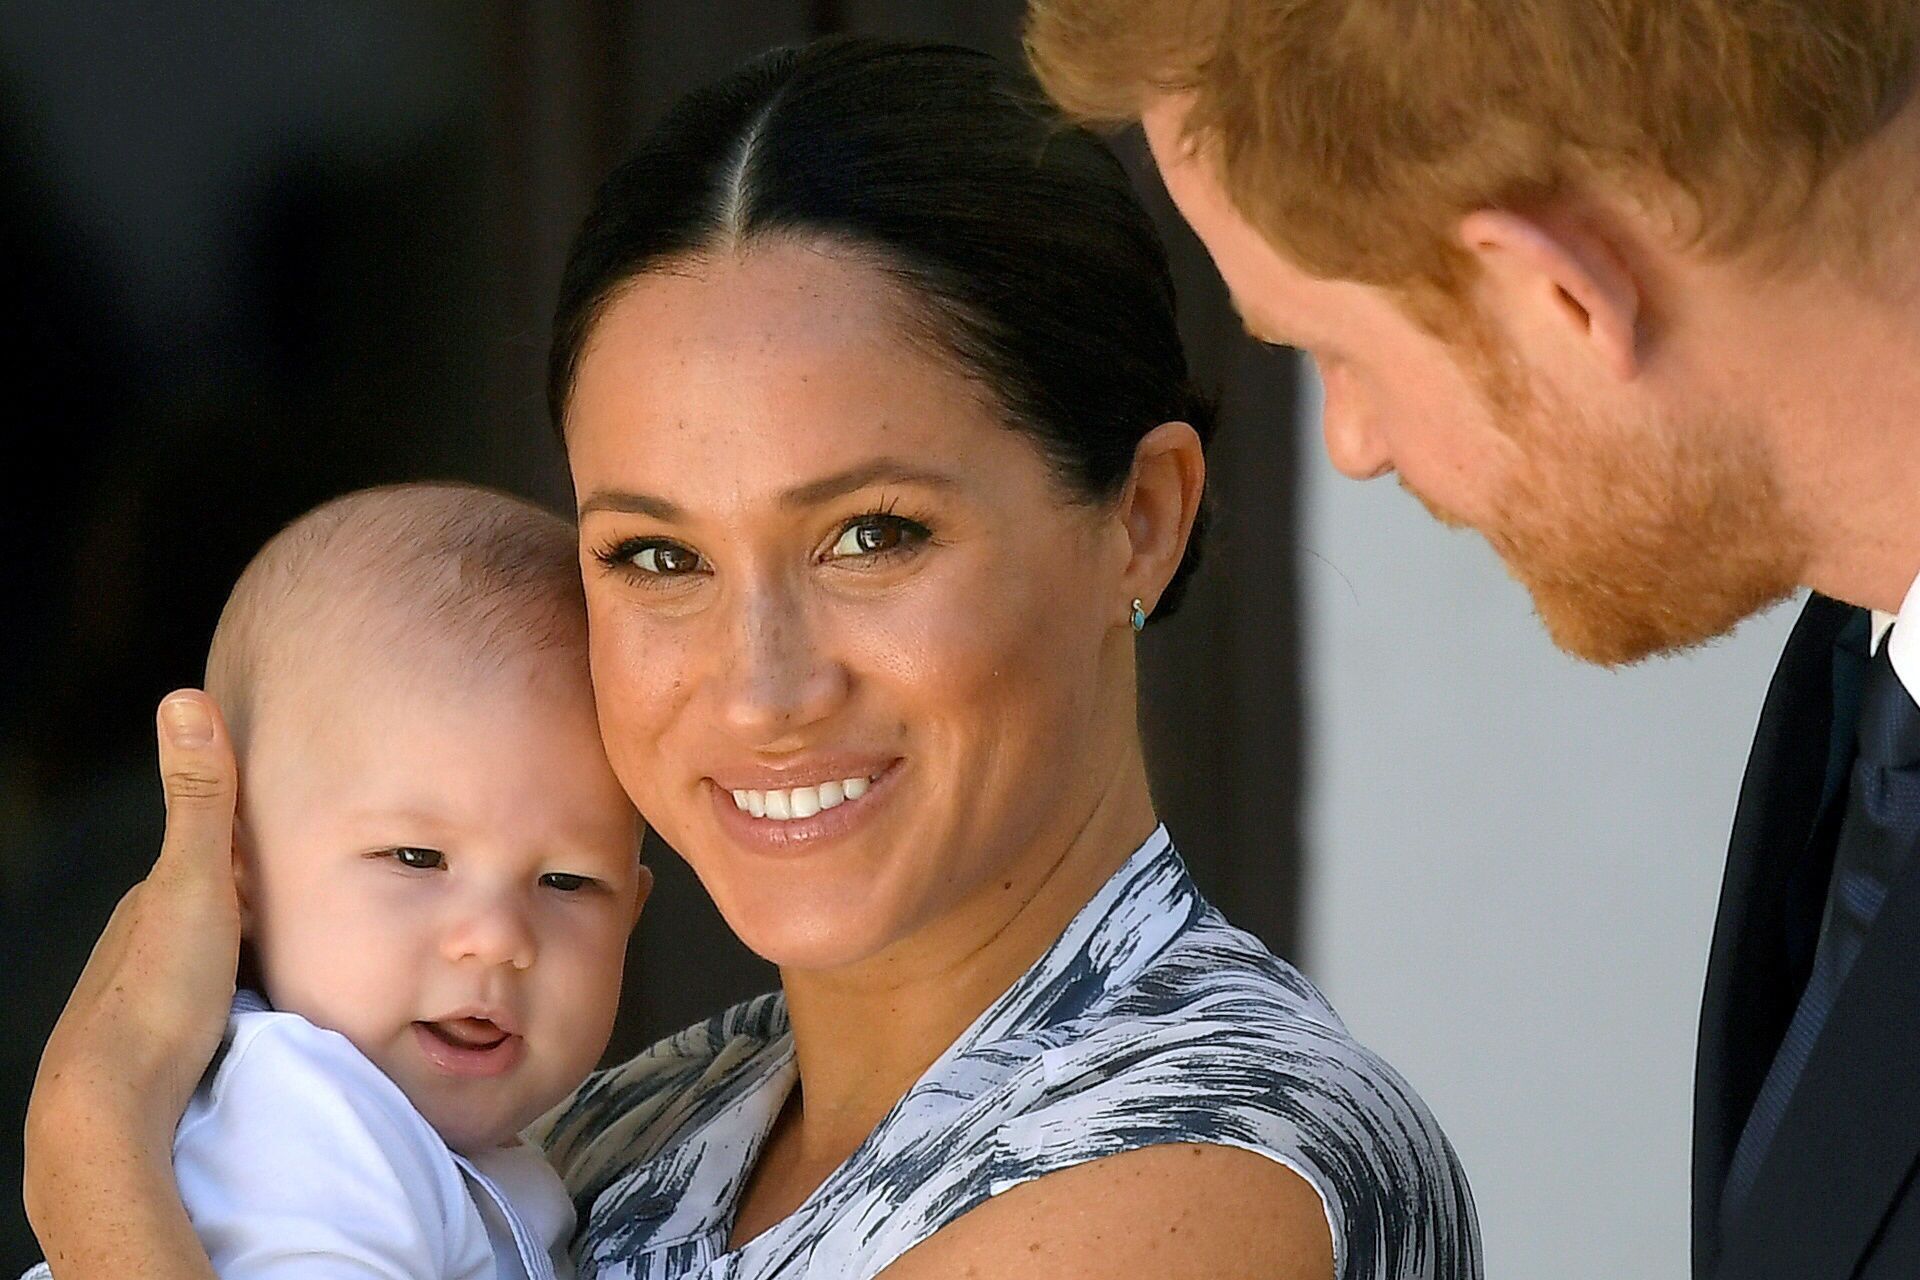 Meghan & Harry Reportedly Keep Royals Up to Date About Baby Lilibet…in WhatsApp Group - Sputnik International, 1920, 17.06.2021